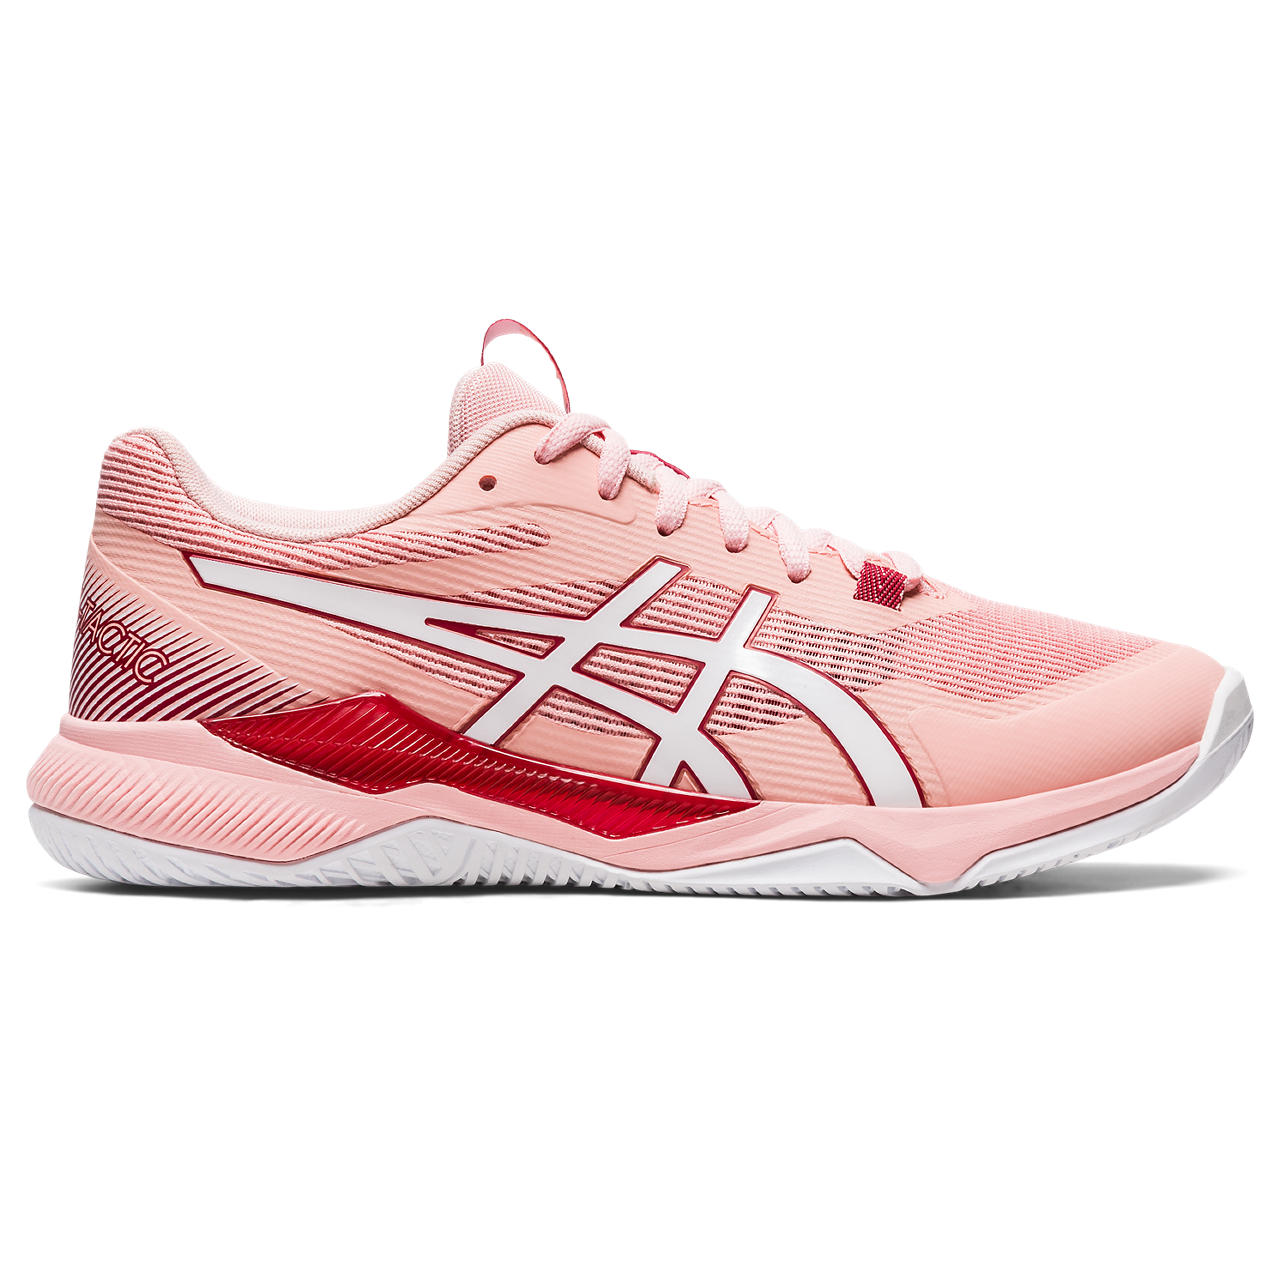 ASICS GEL-TACTIC, FROSTED ROSE/WHITE, swatch